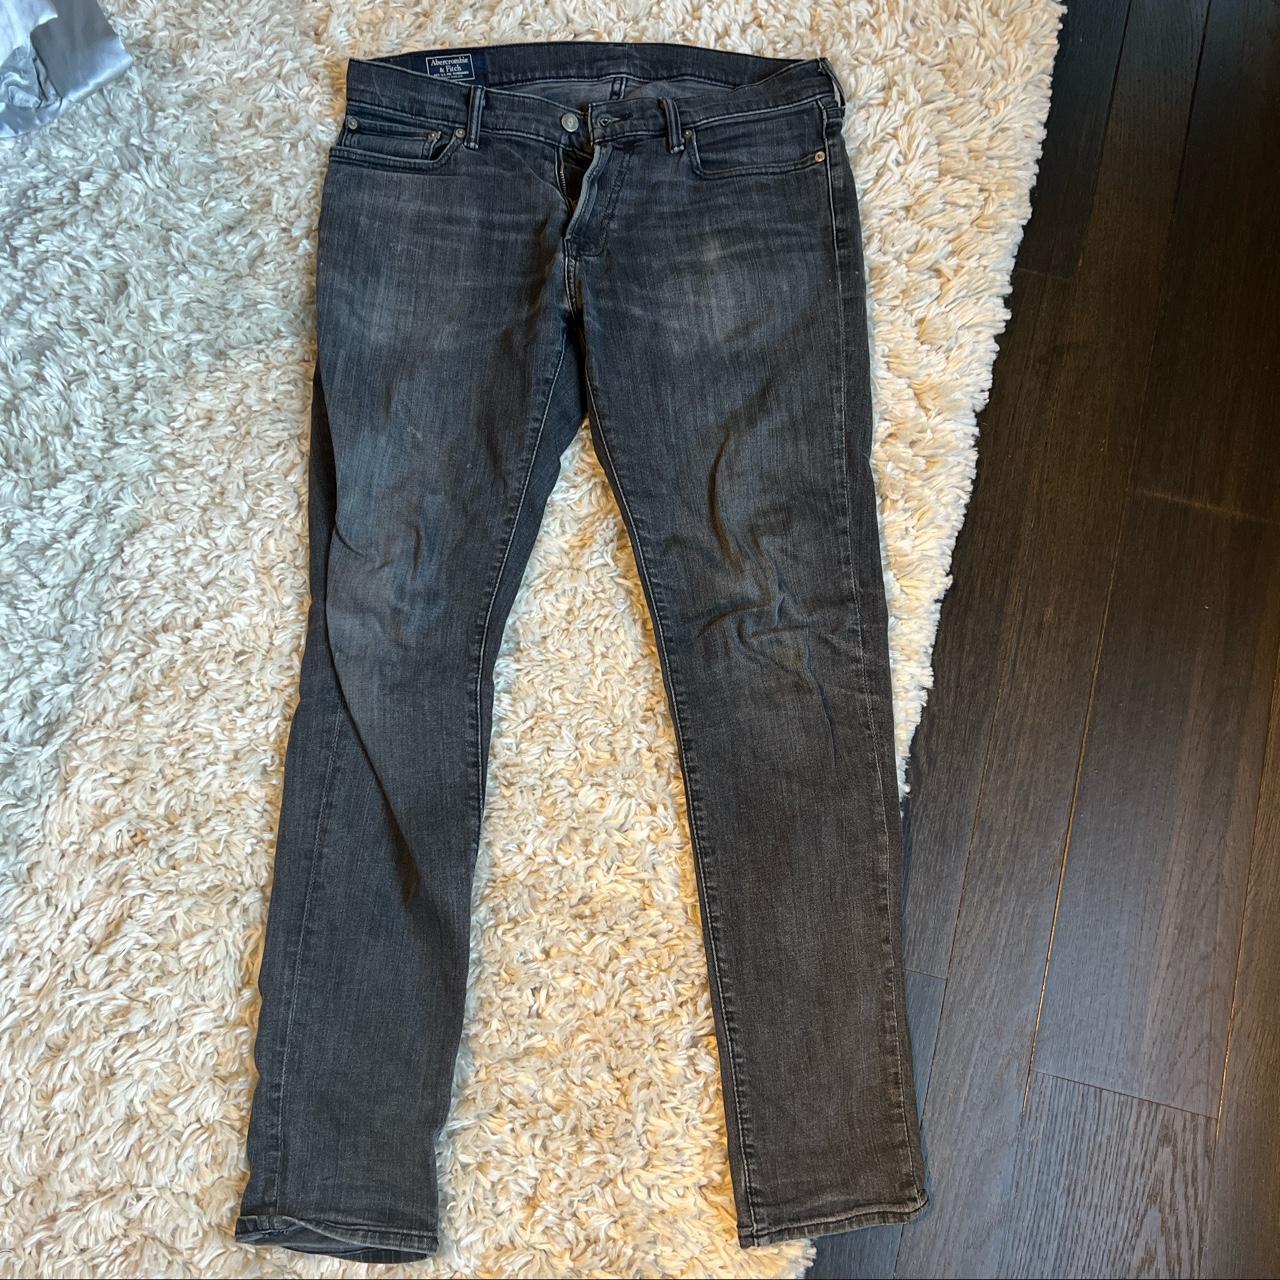 Abercrombie & Fitch Men's Black and Grey Jeans | Depop